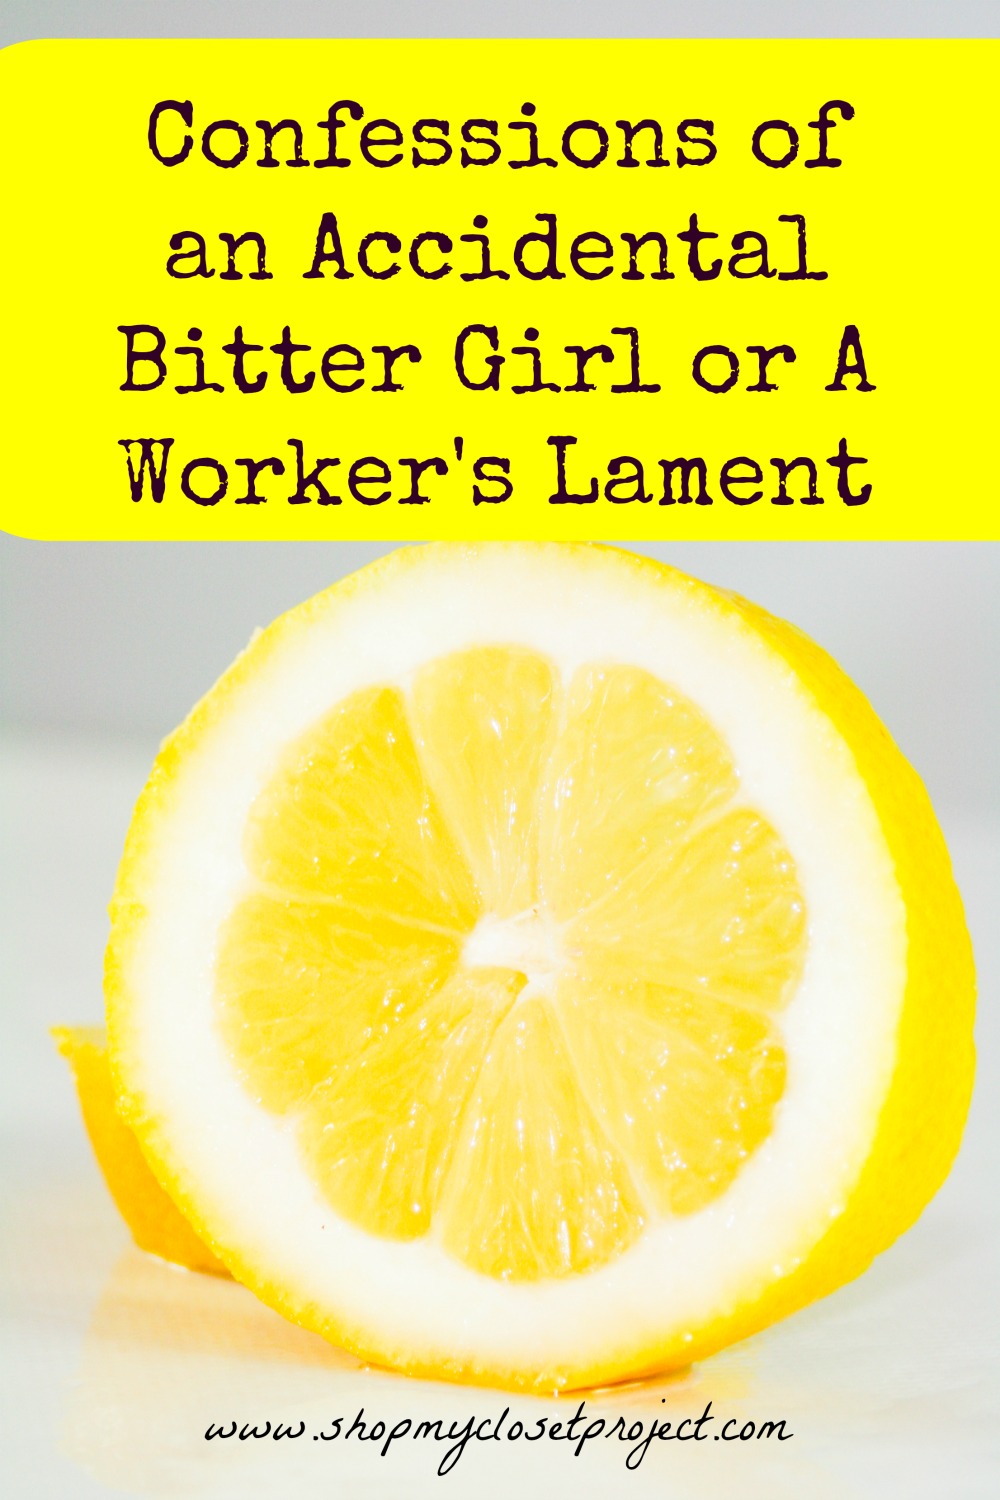 Confessions of an Accidental Bitter Girl or A Worker’s Lament